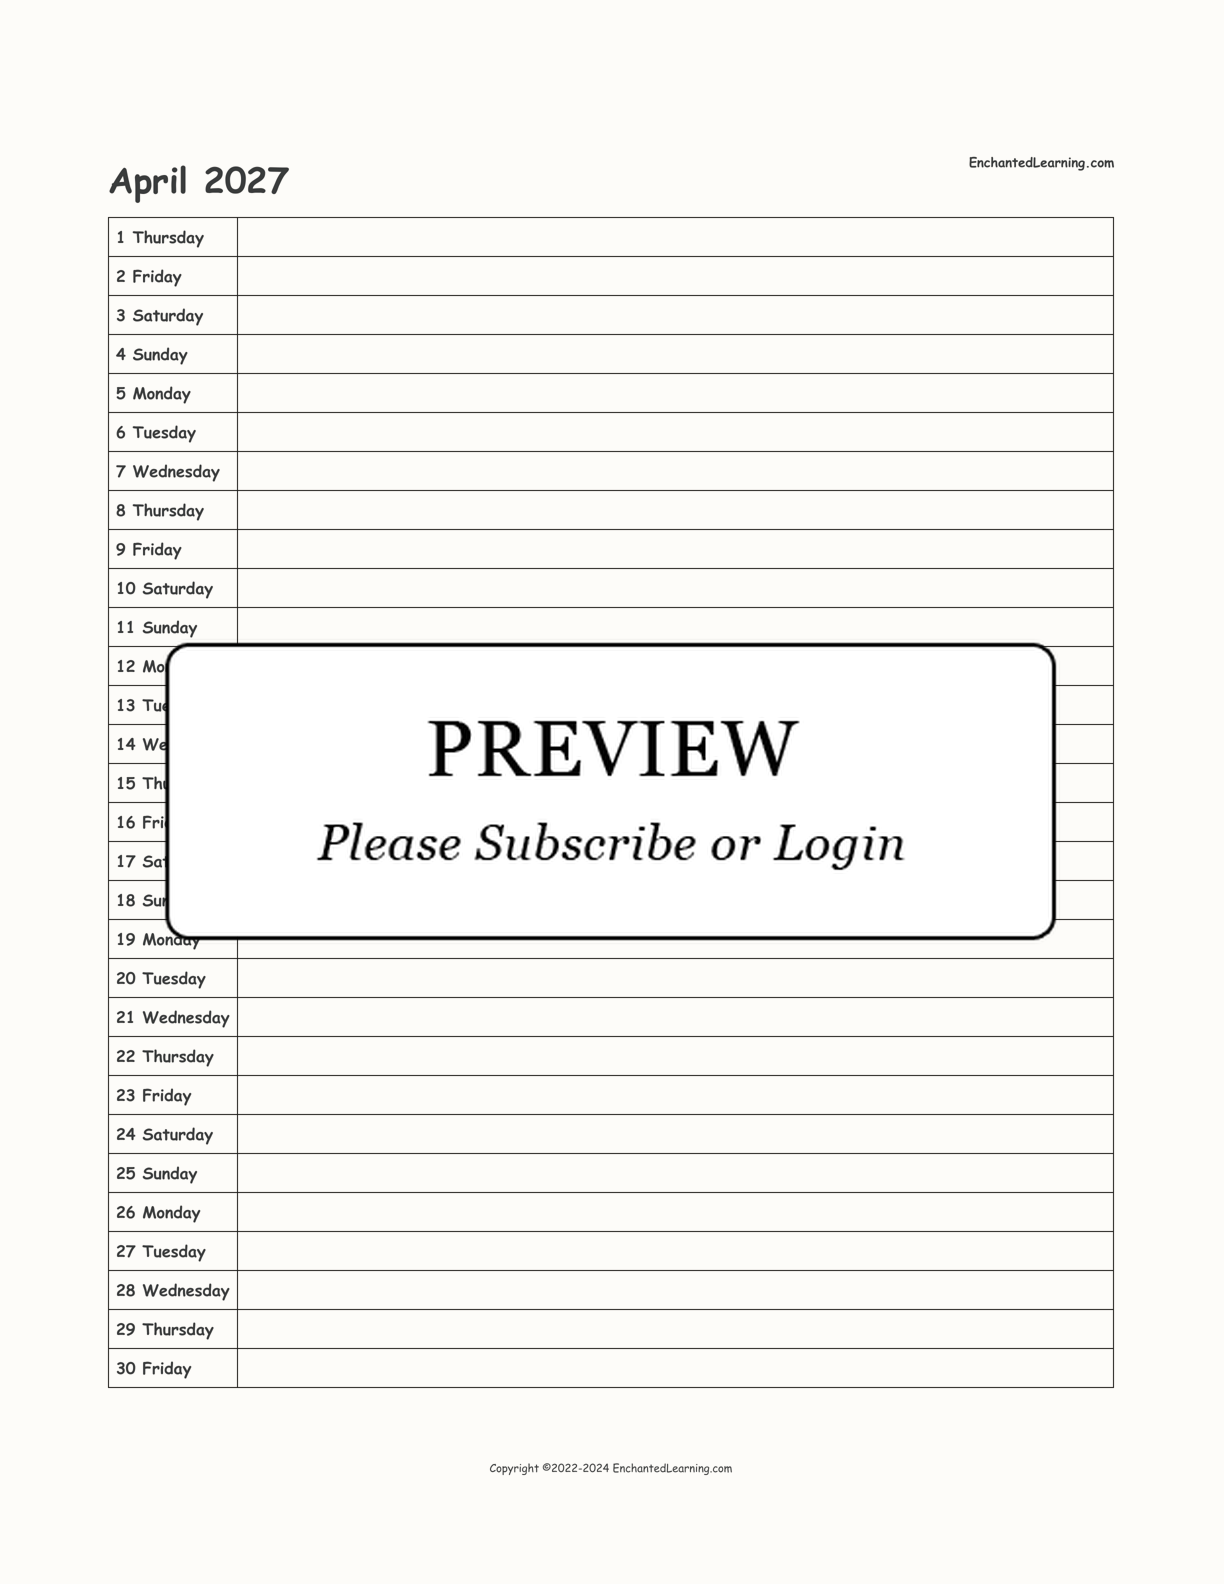 2027 Scheduling Calendar interactive printout page 4